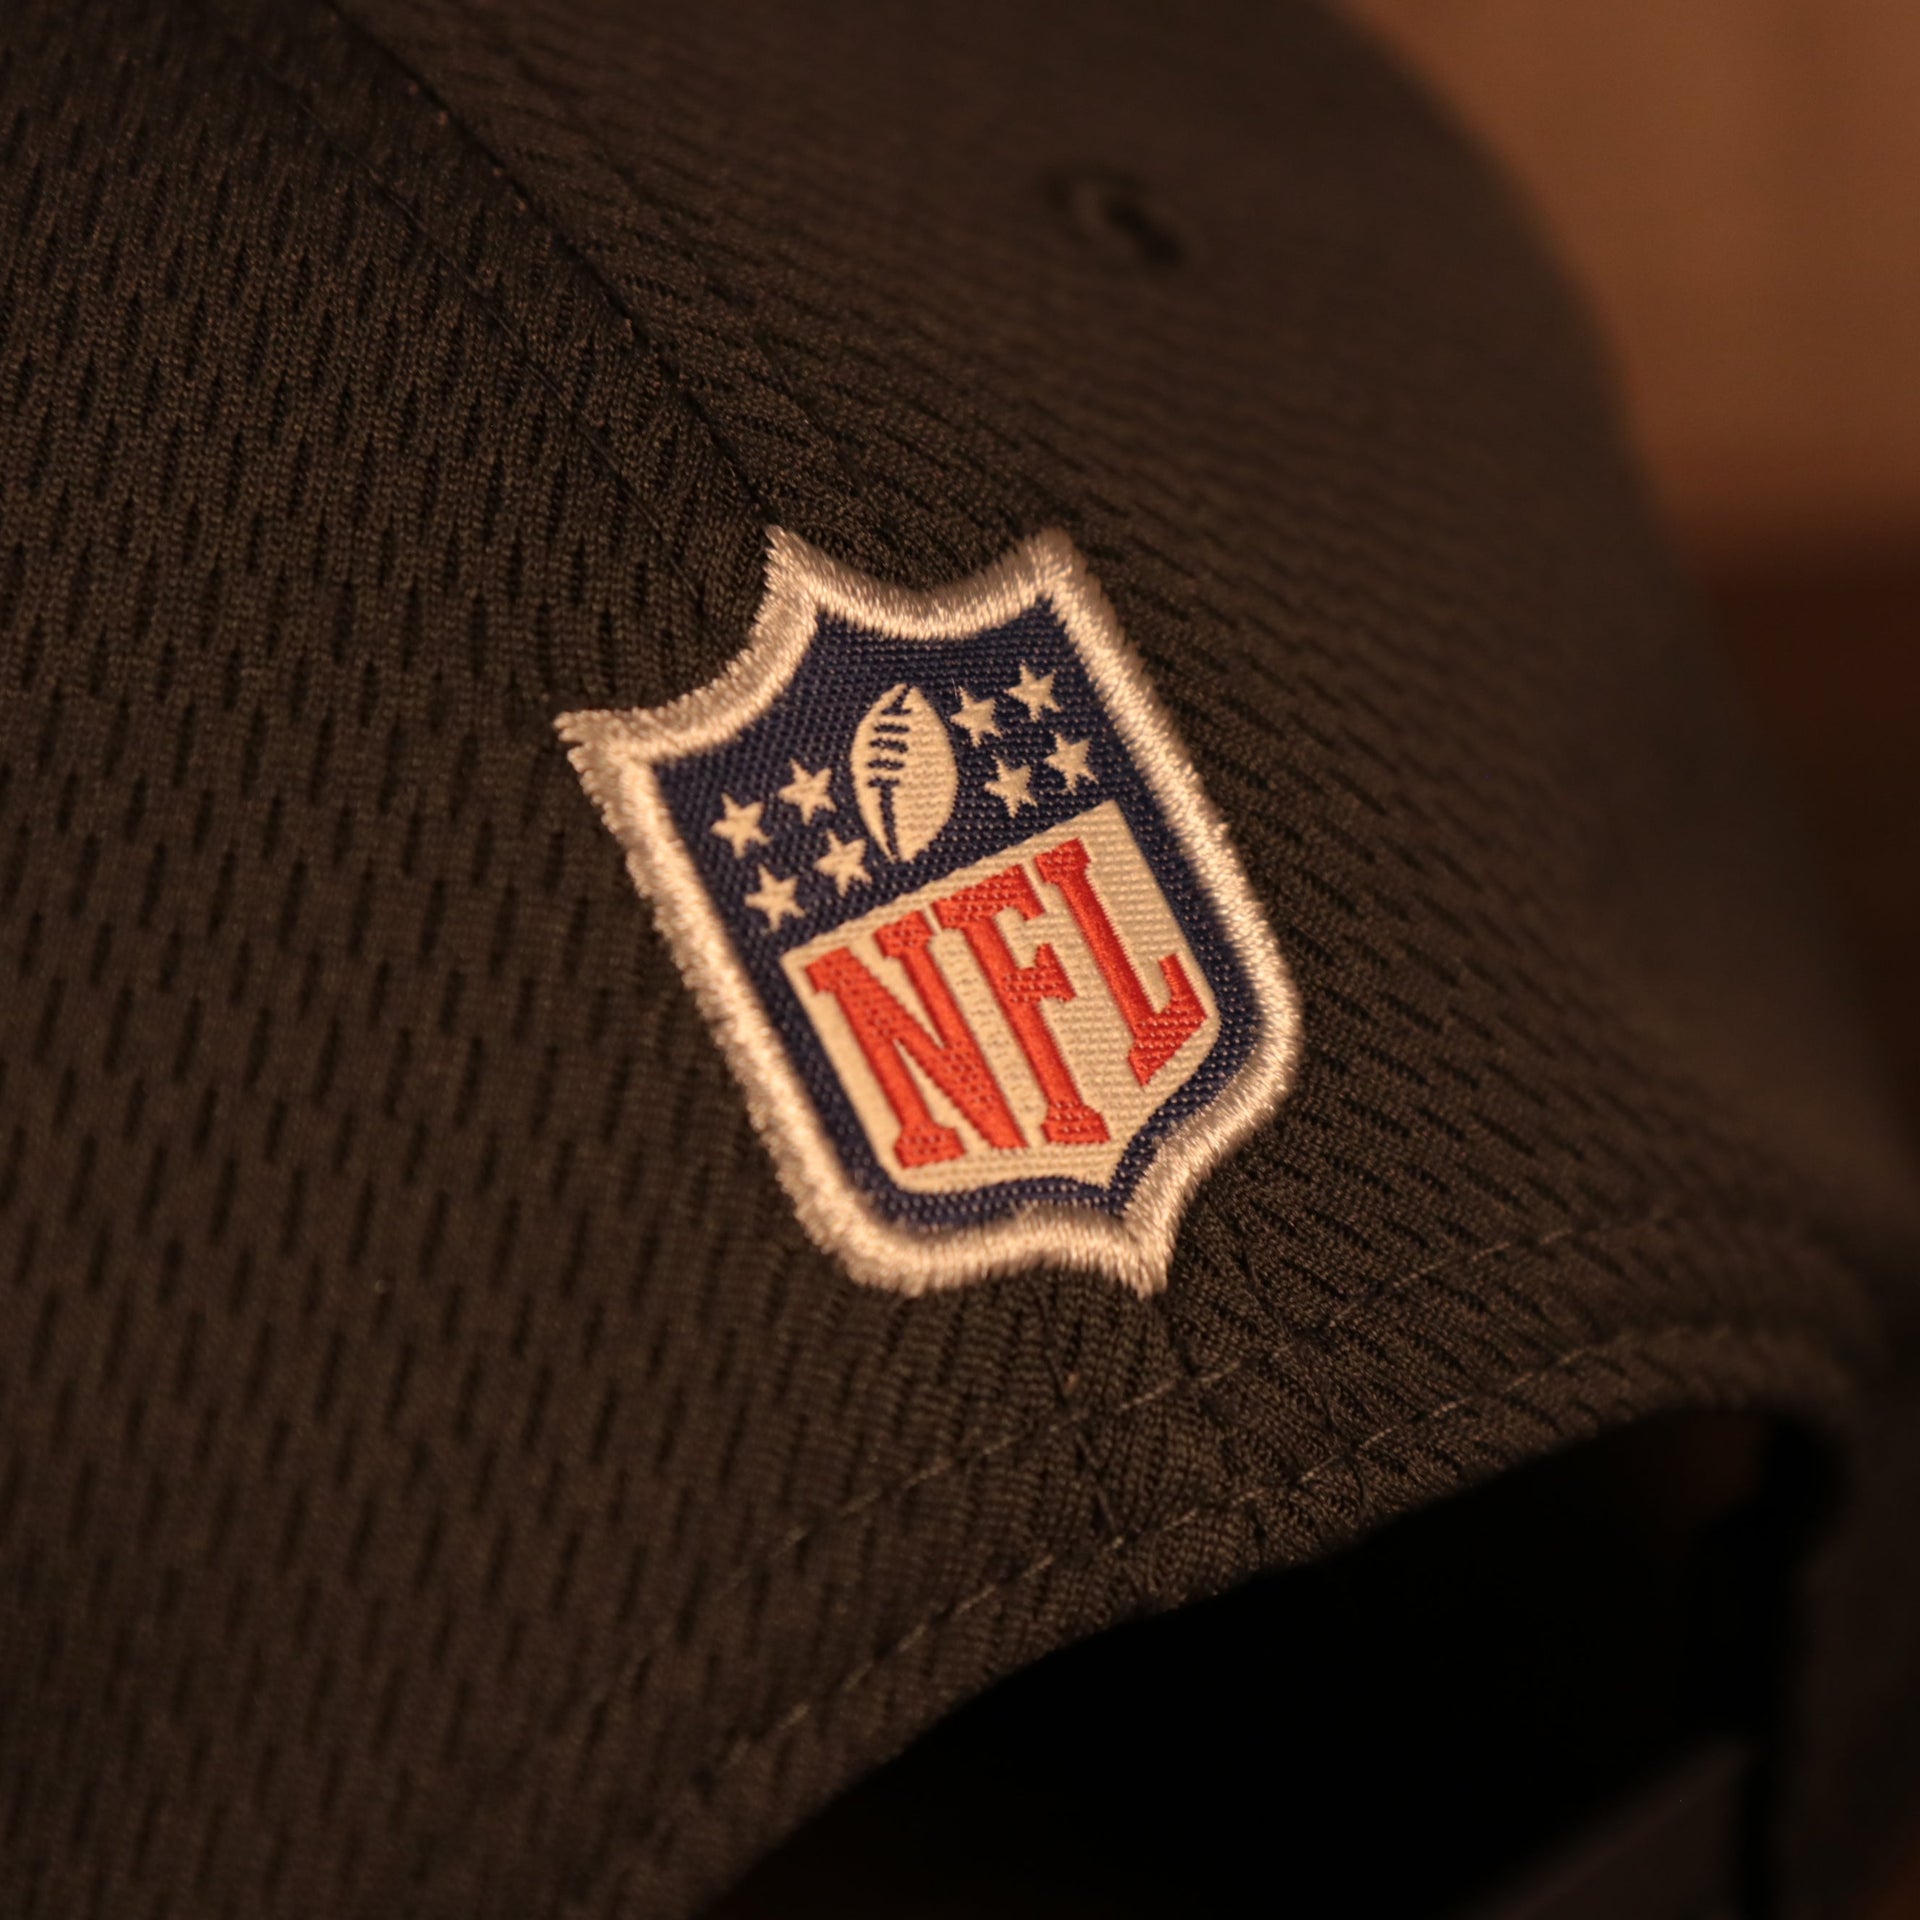 Close up of the NFL shield on the NFL Shield 2021 Crucial Catch Breast Cancer Awareness 9Fifty Snapback Hat